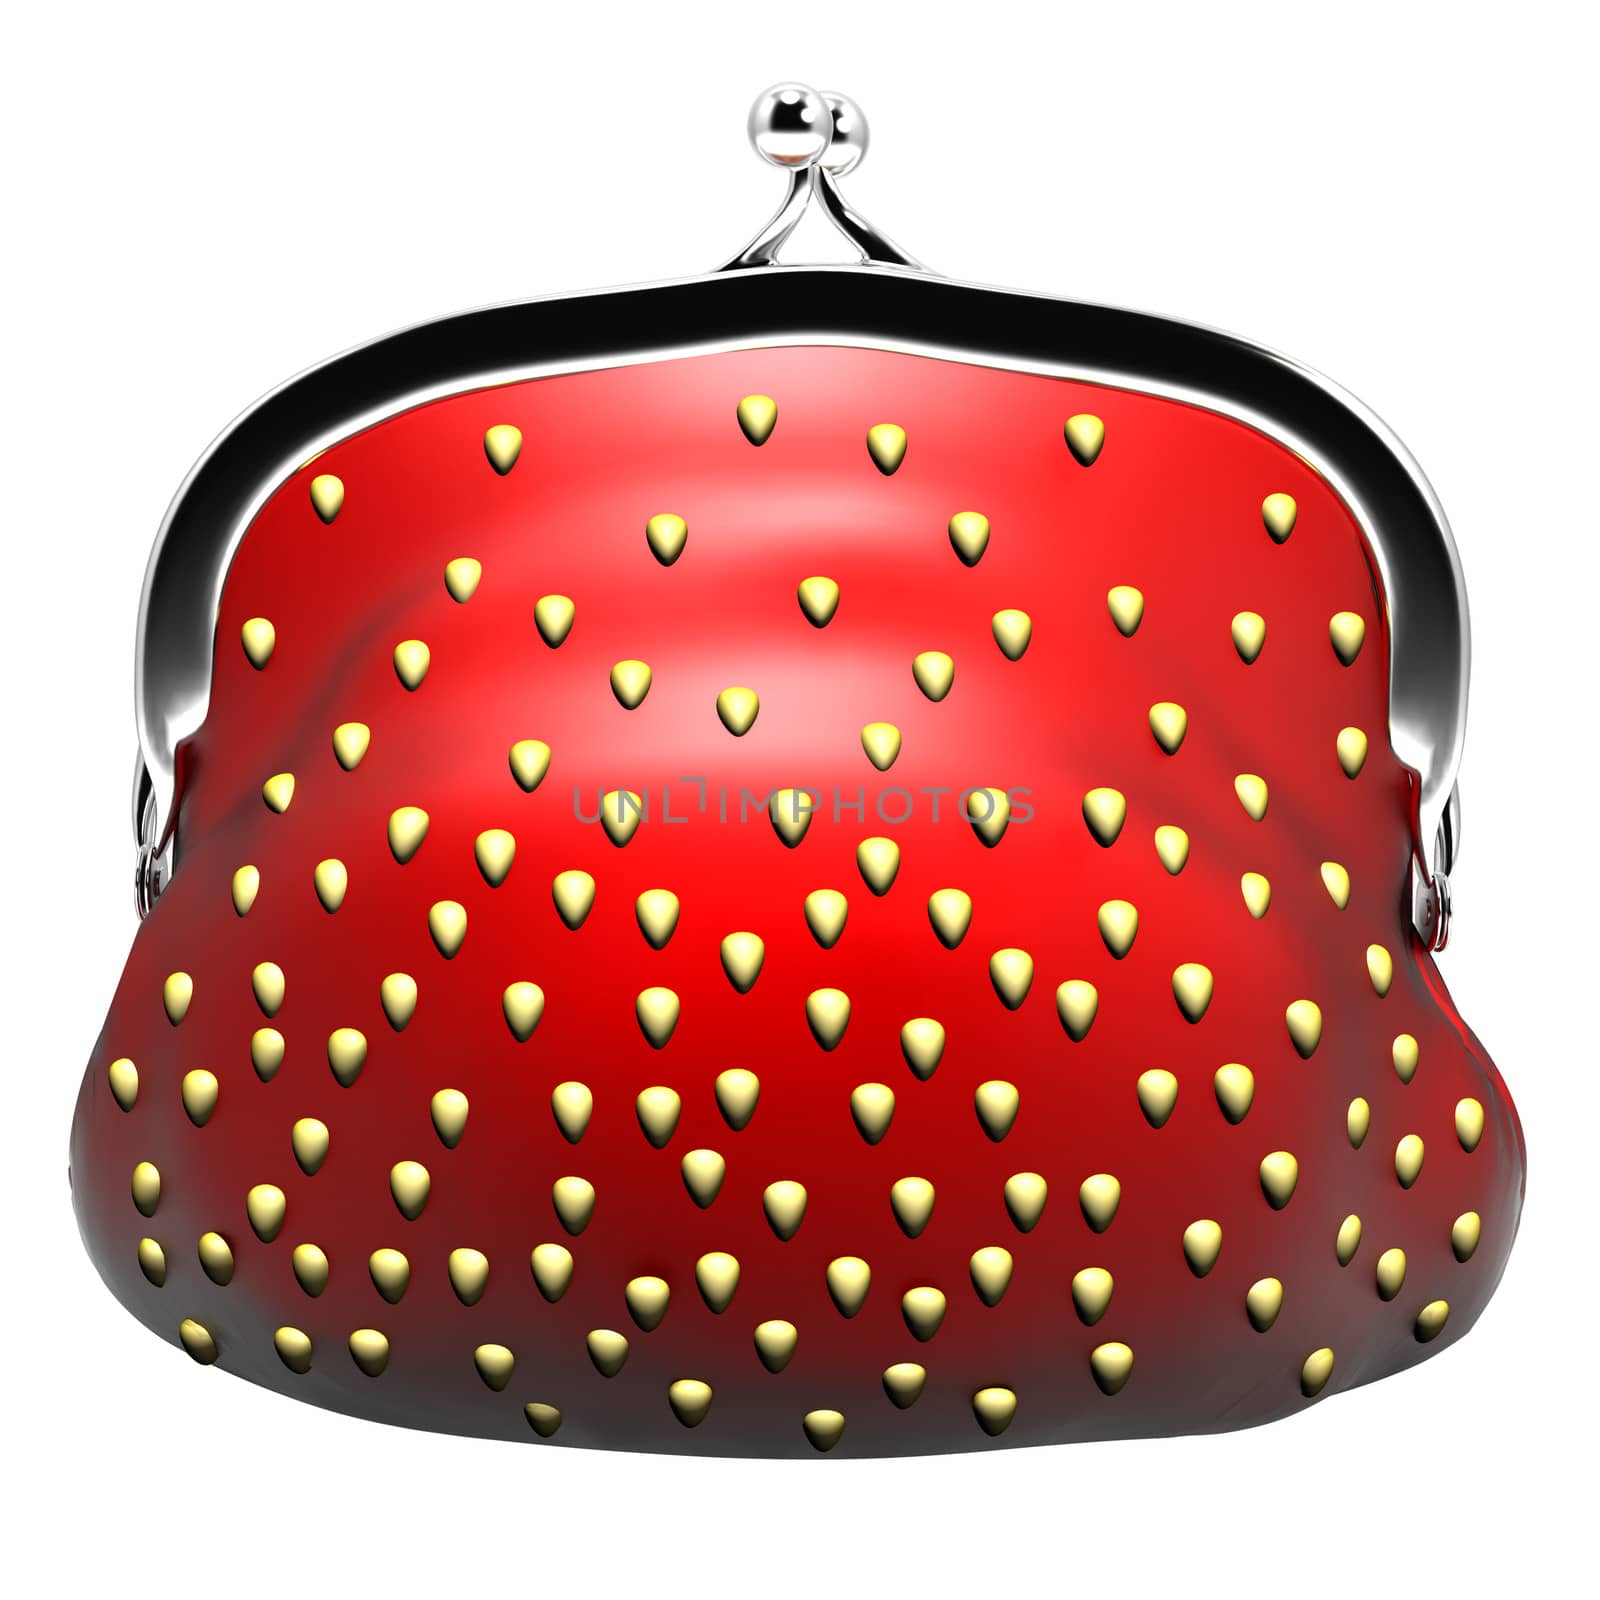 3D visualization appetizing purse strawberries (pouch strawberries)